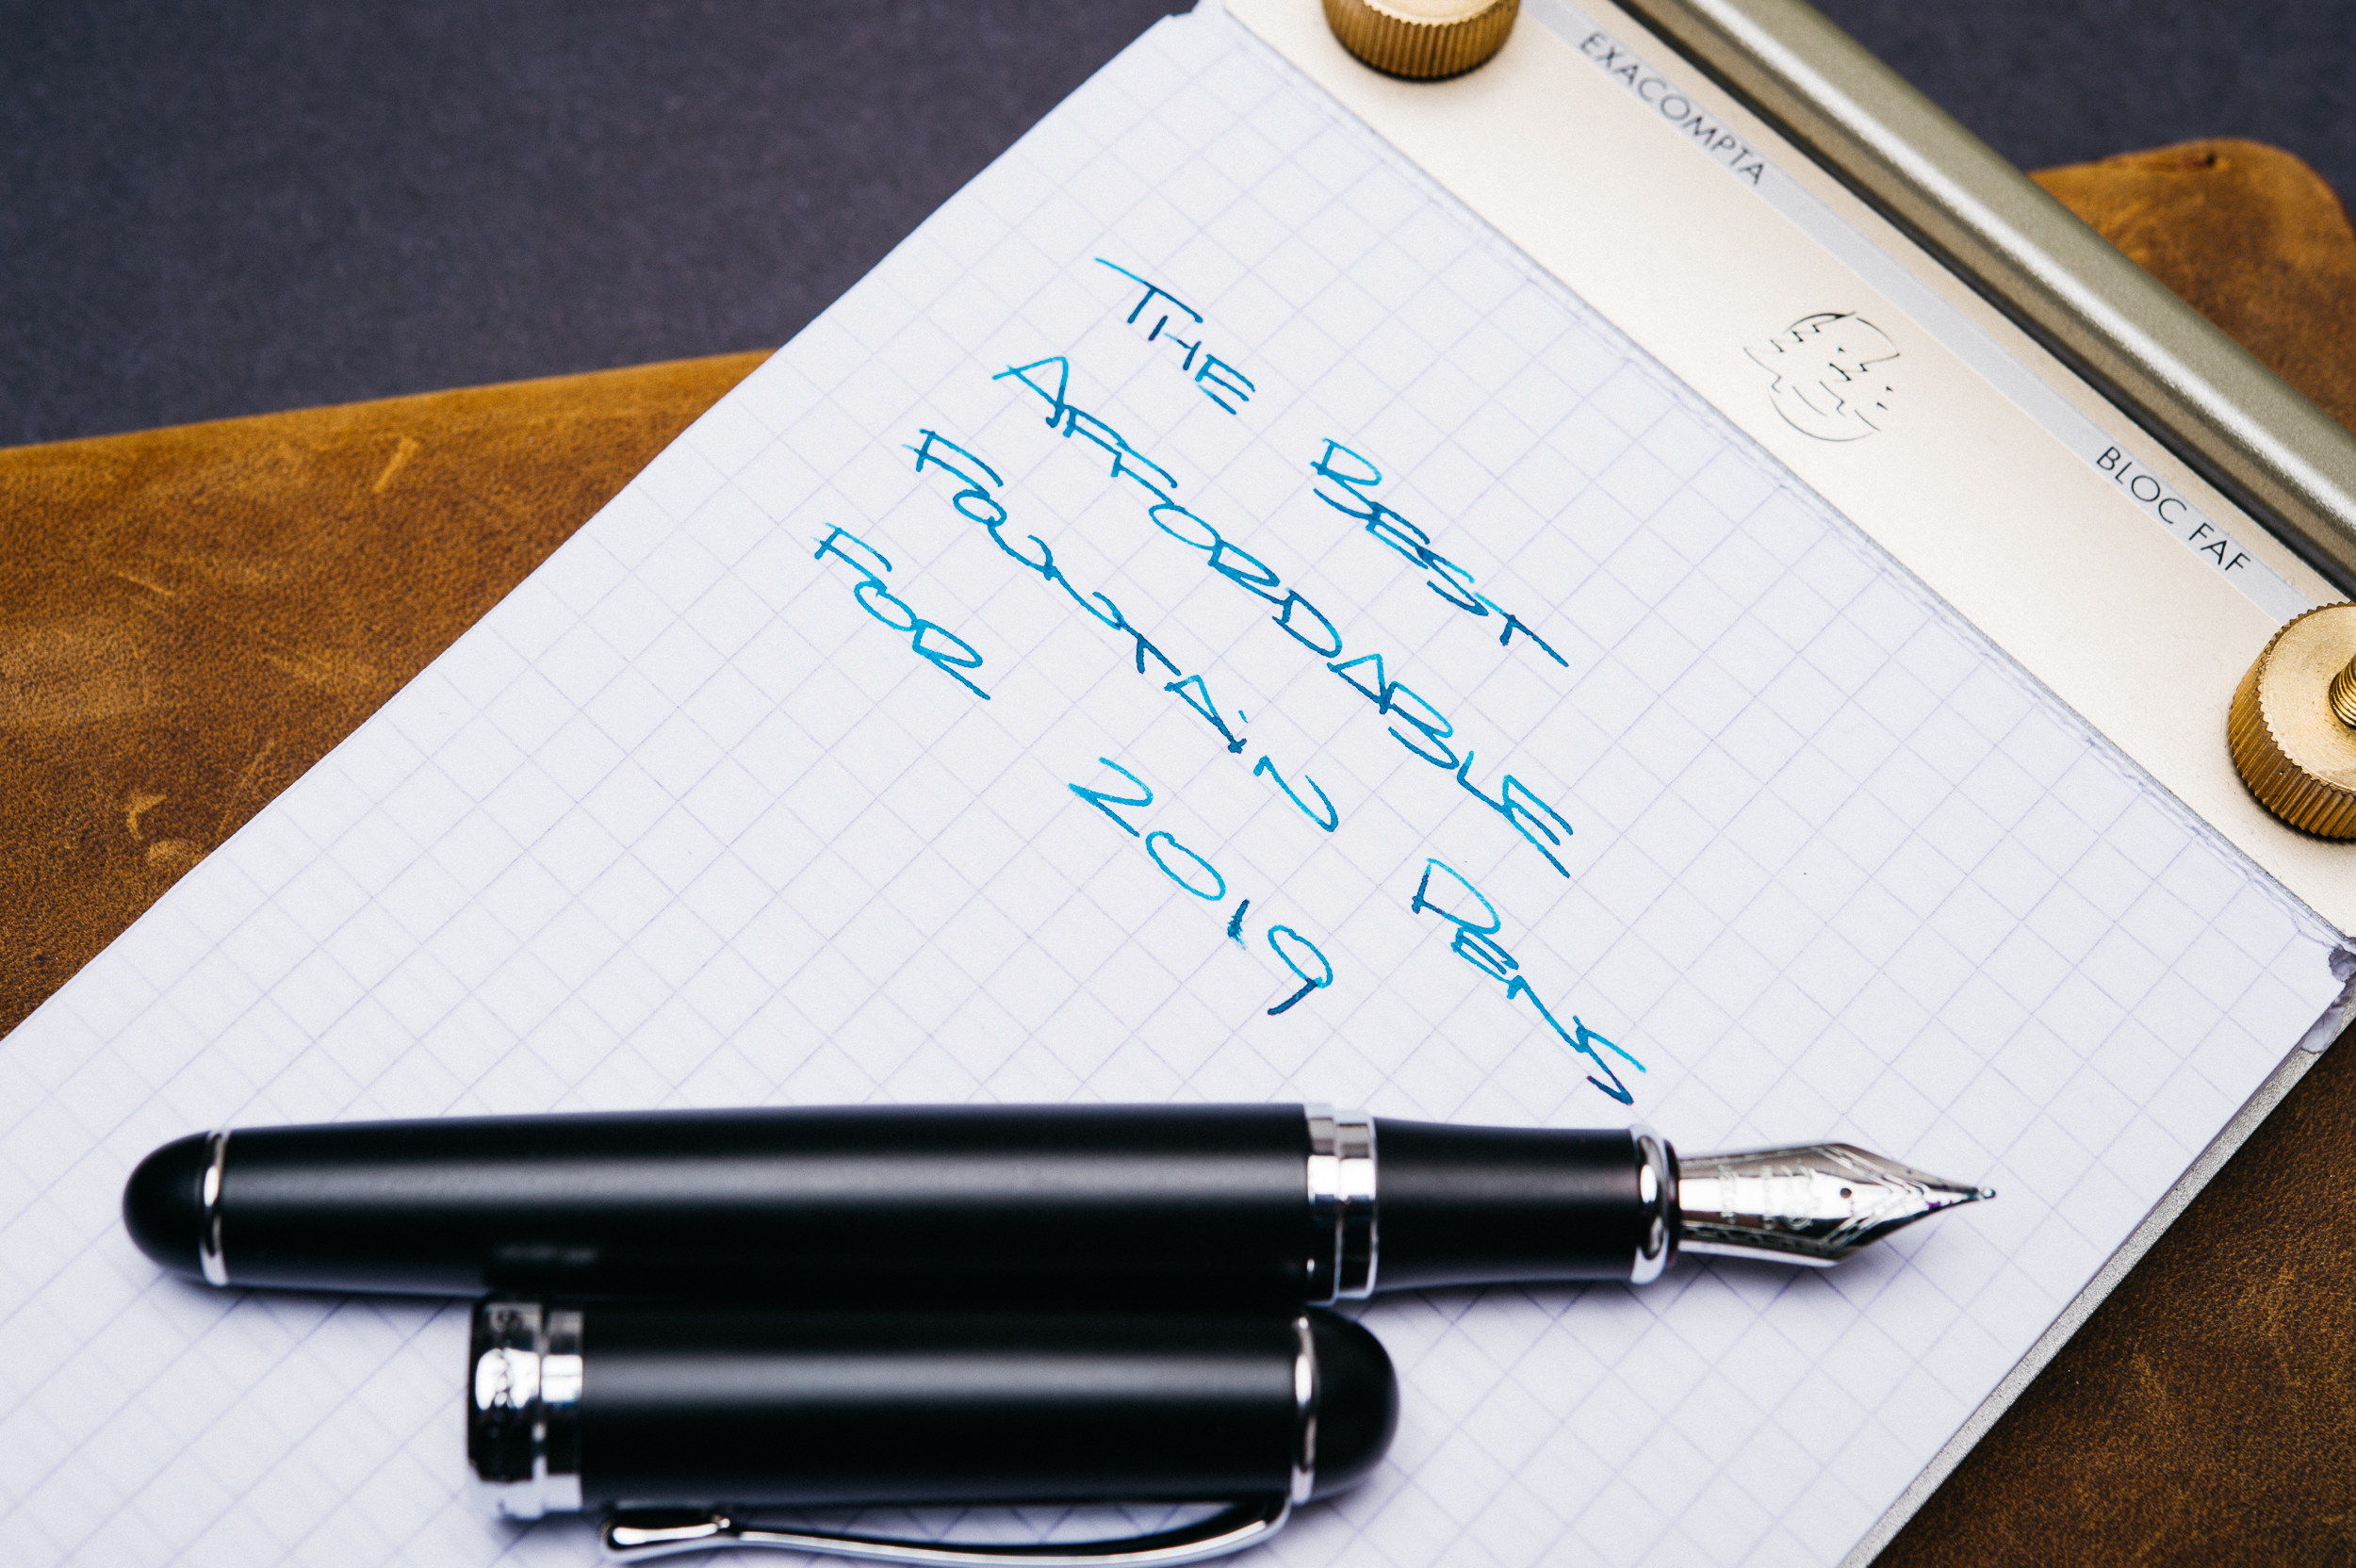 The Top 7 Beginner Fountain Pens Under $25 for 2019